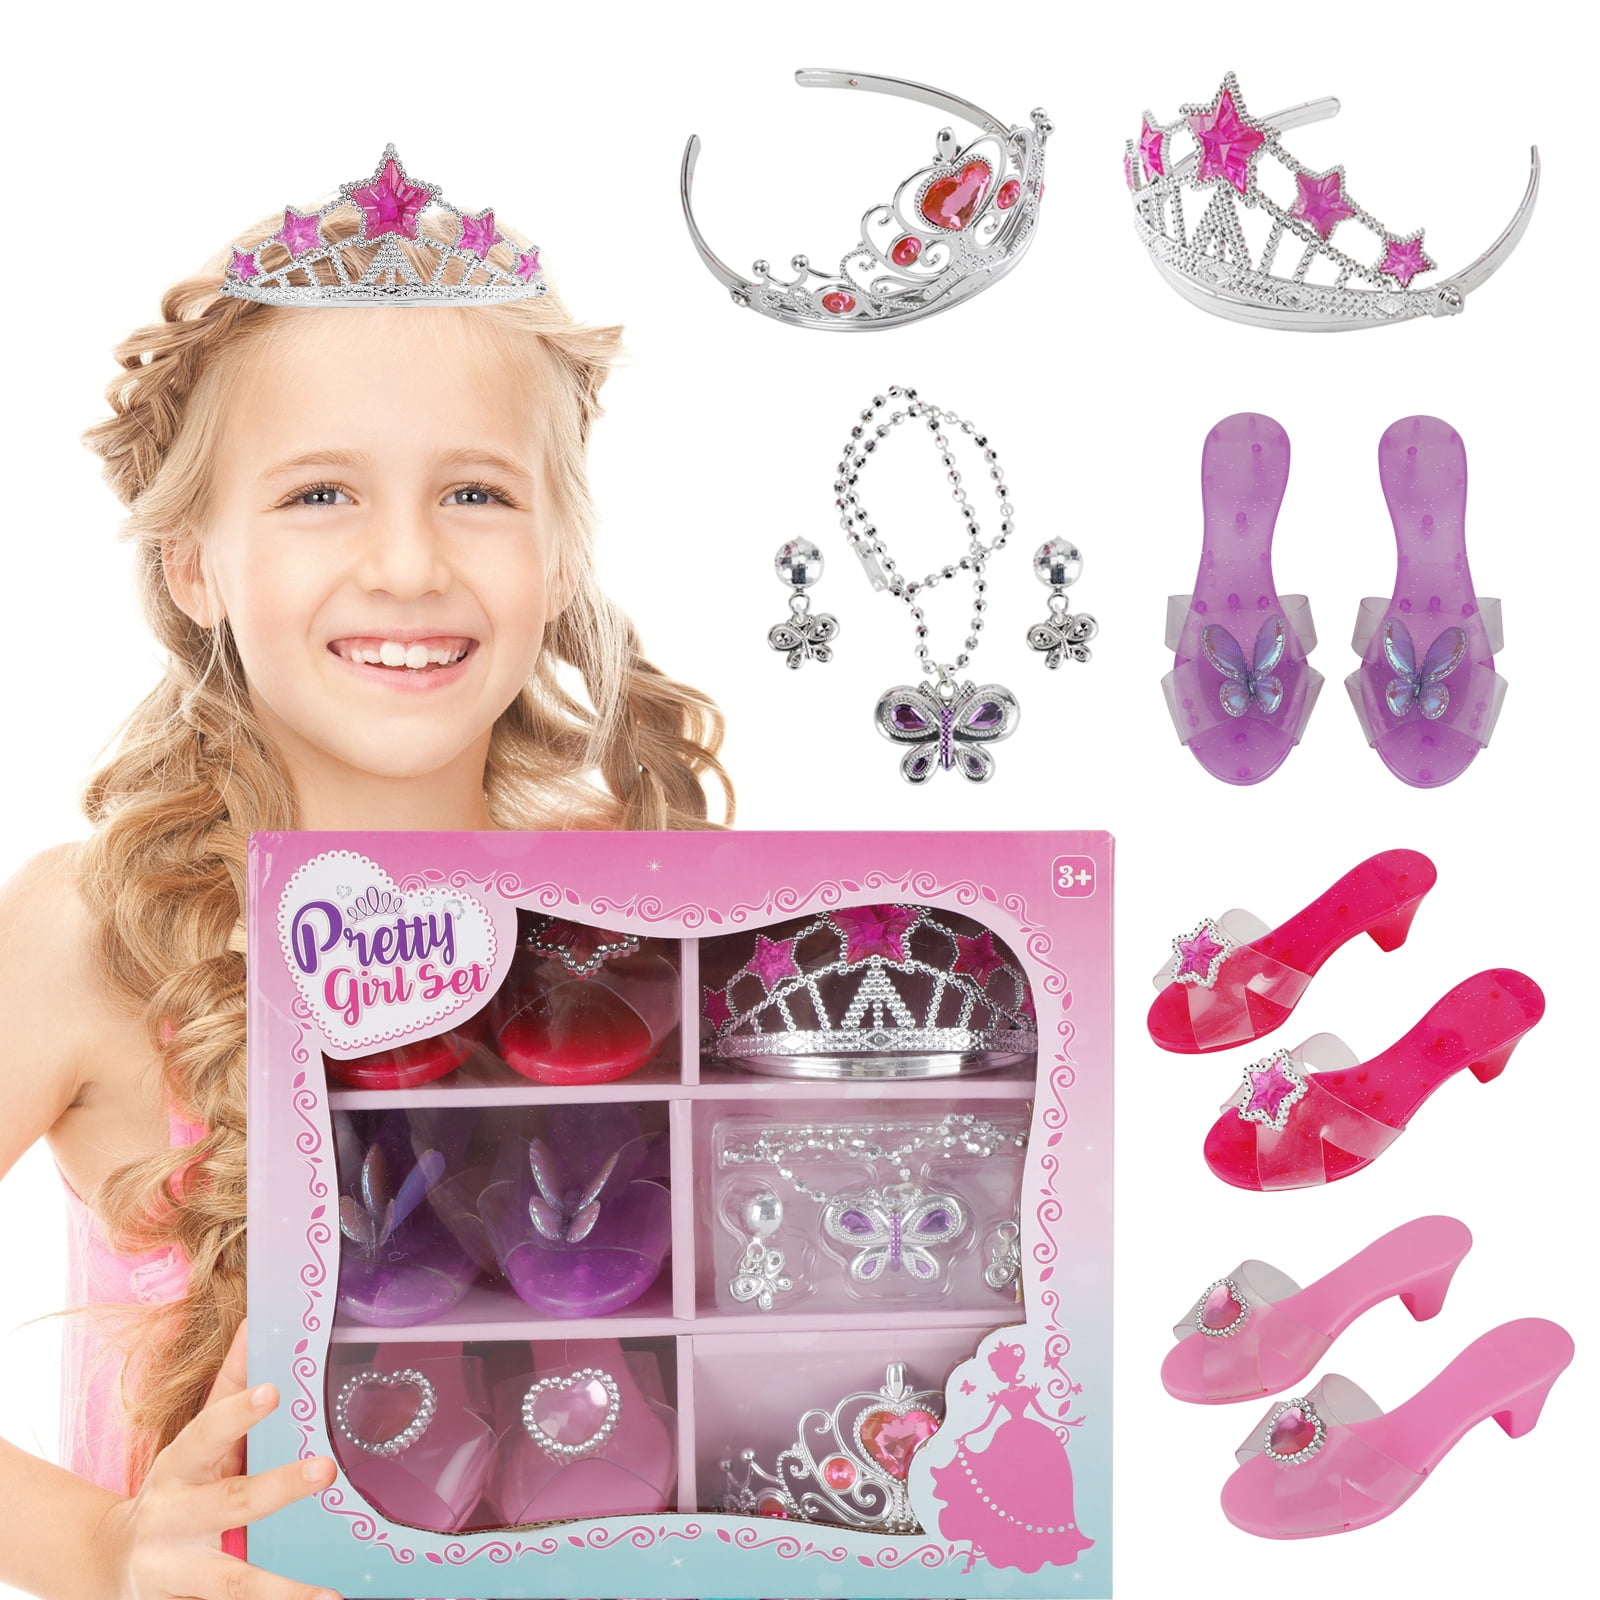  Toys for Girls Jewelry,37PCS Princess Toddler Girl Toys Age 6-8  for Pretend Play & Dress Up, Adjustable Ring Clip on Earrings Kids Toys for  3 4 5 6 7 8 9